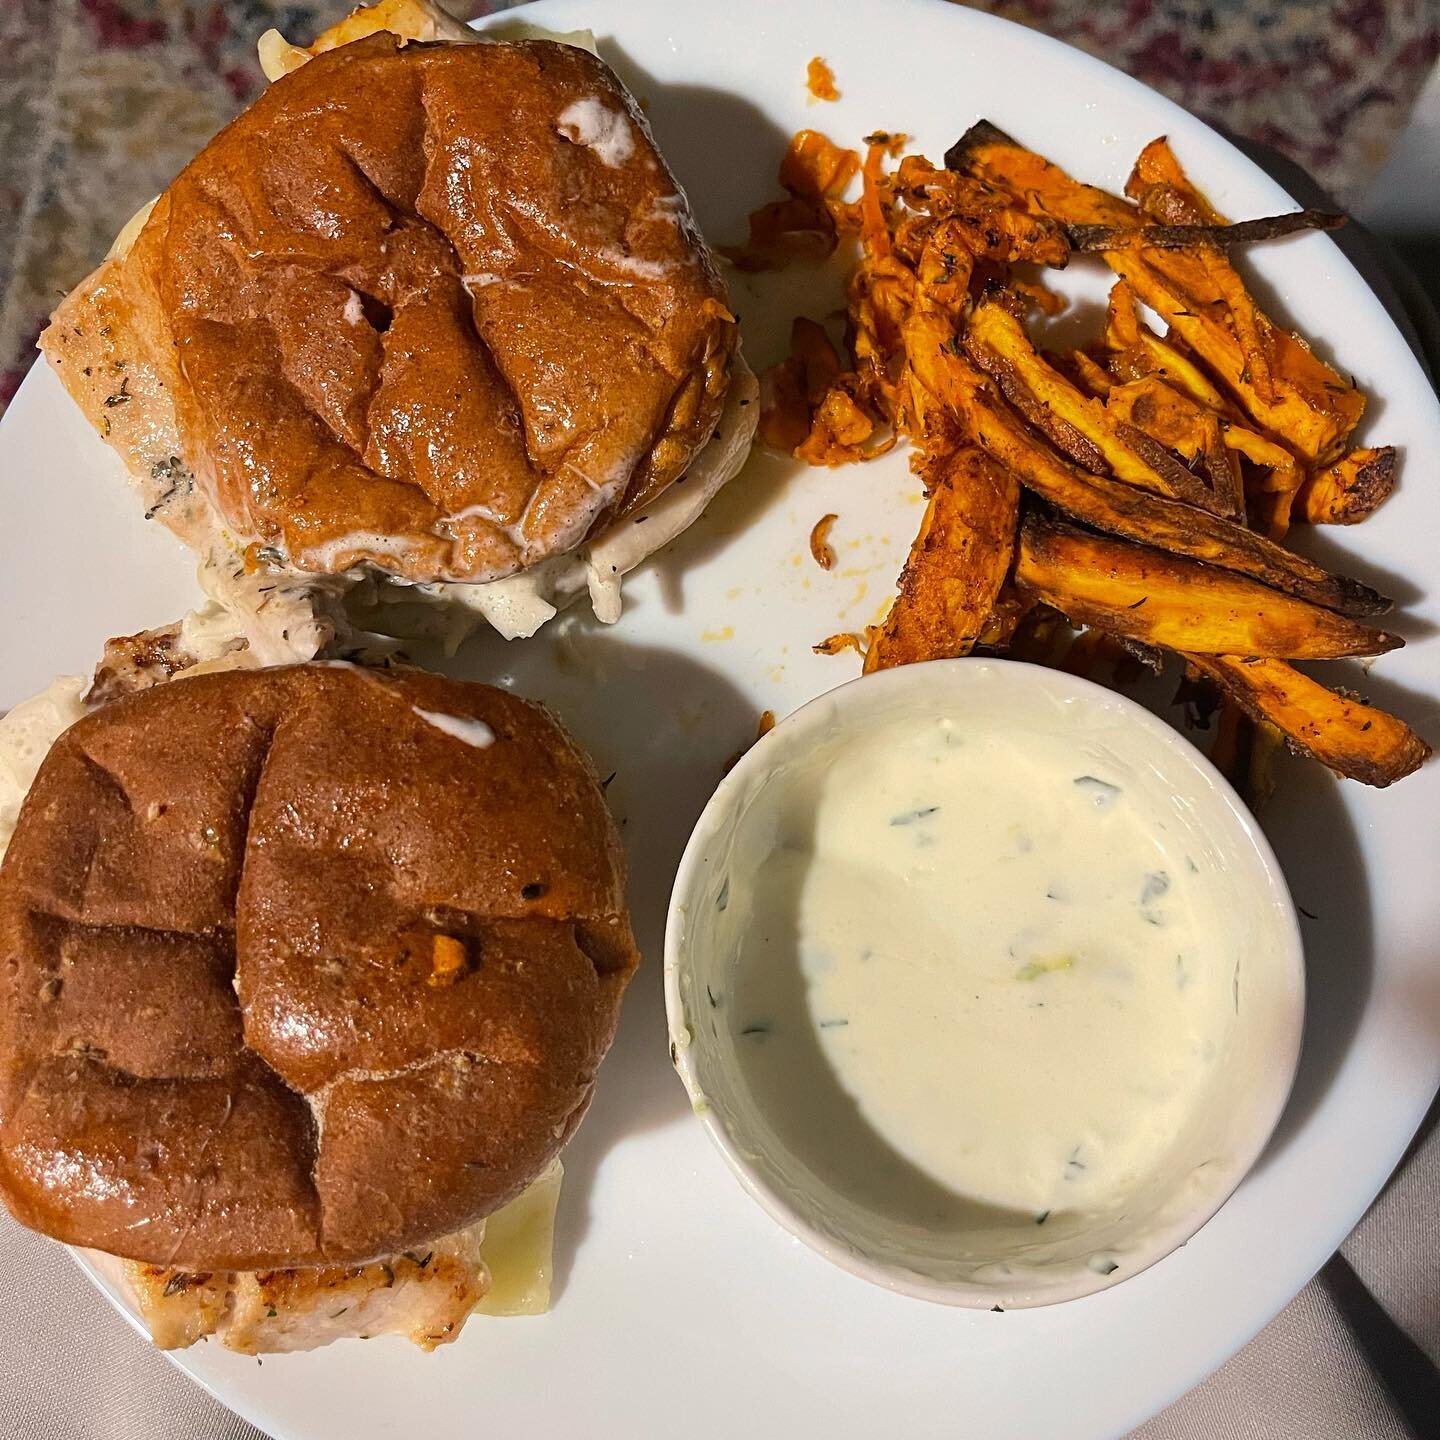 Made Mahi Mahi Burgers with a Coconut Wasabi Aoli. Attempted my own sweet potato fries too but you can tell this was a rushed &ldquo;I&rsquo;m hungry&rdquo; meal lol